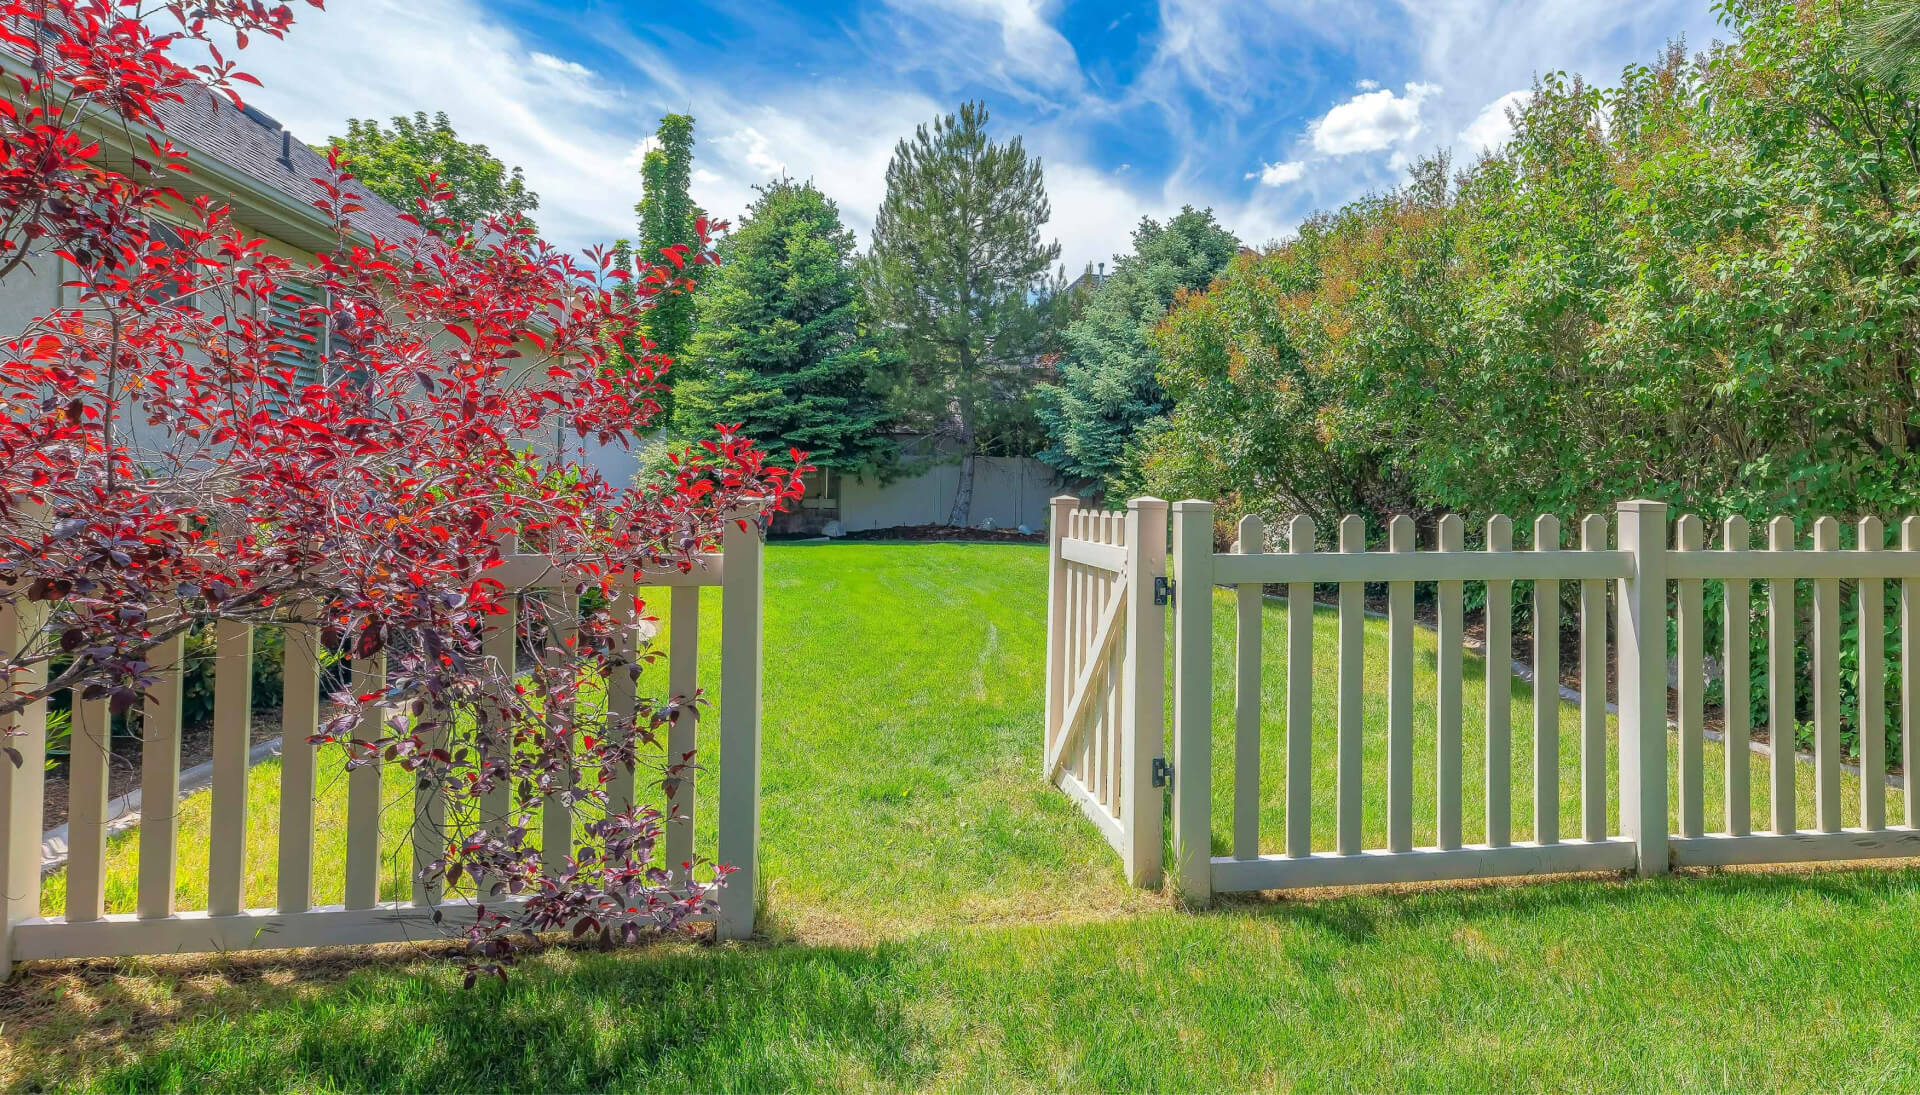 Fence gate installation services in Port Saint